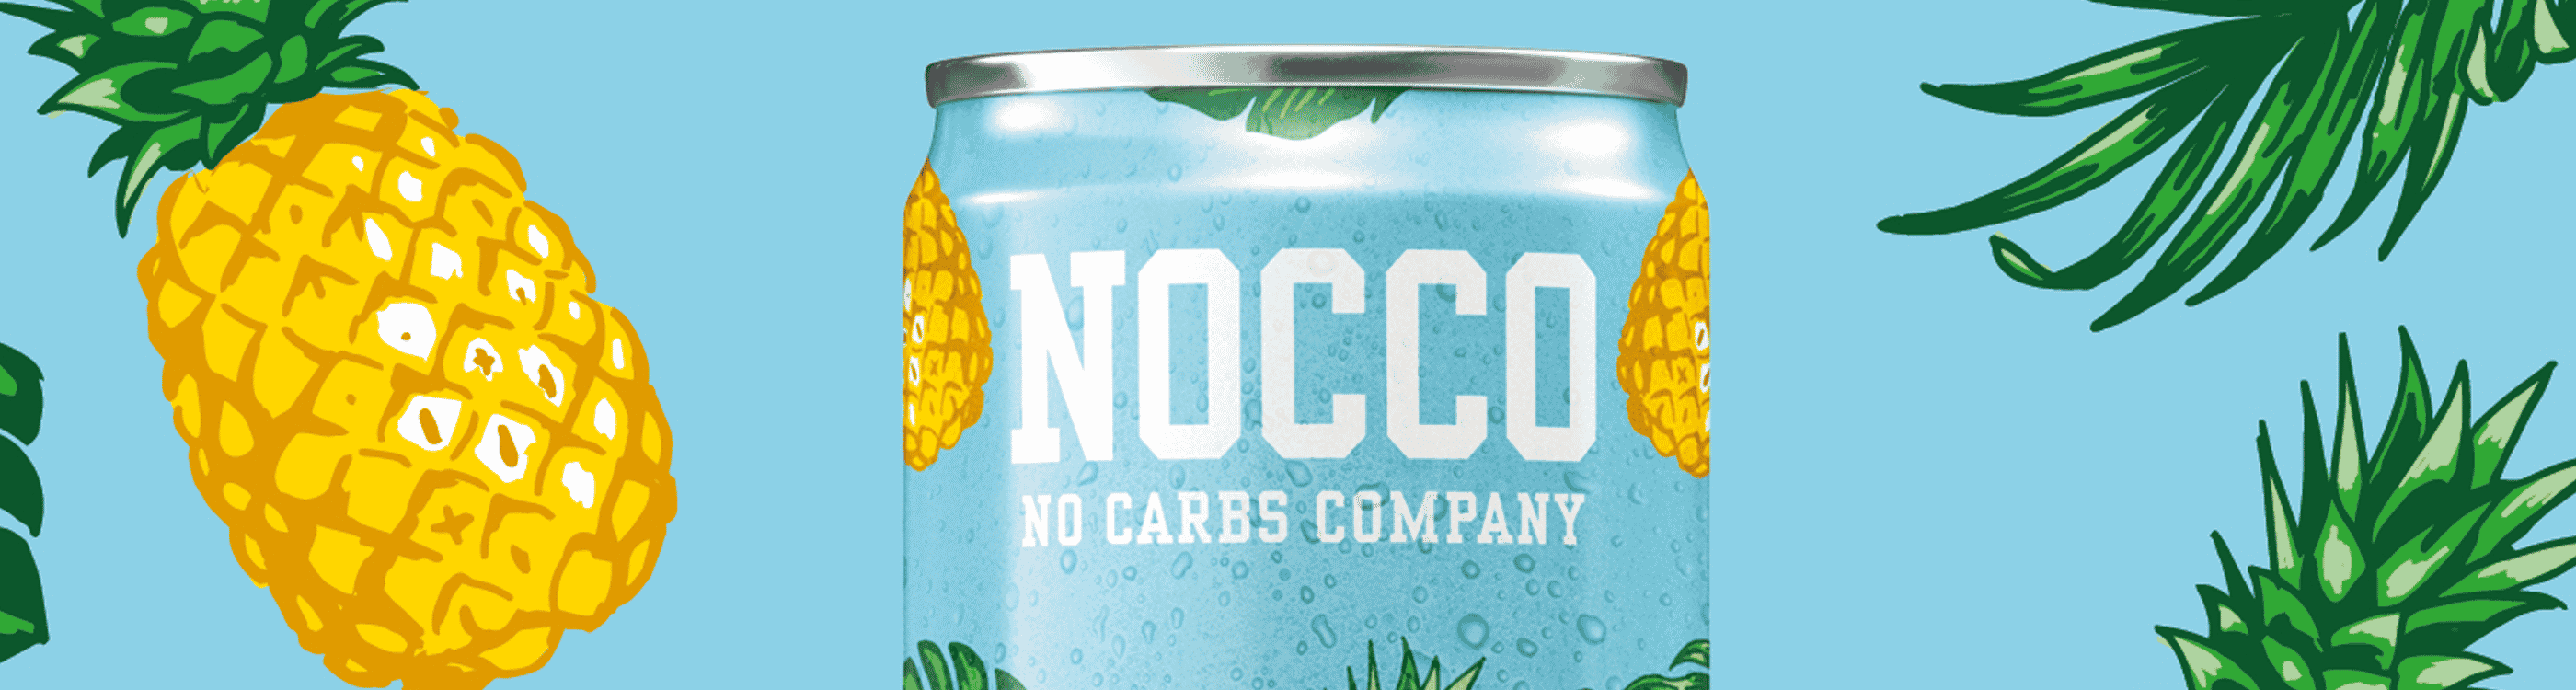 A new limited summer edition NOCCO Caribbean NOCCO